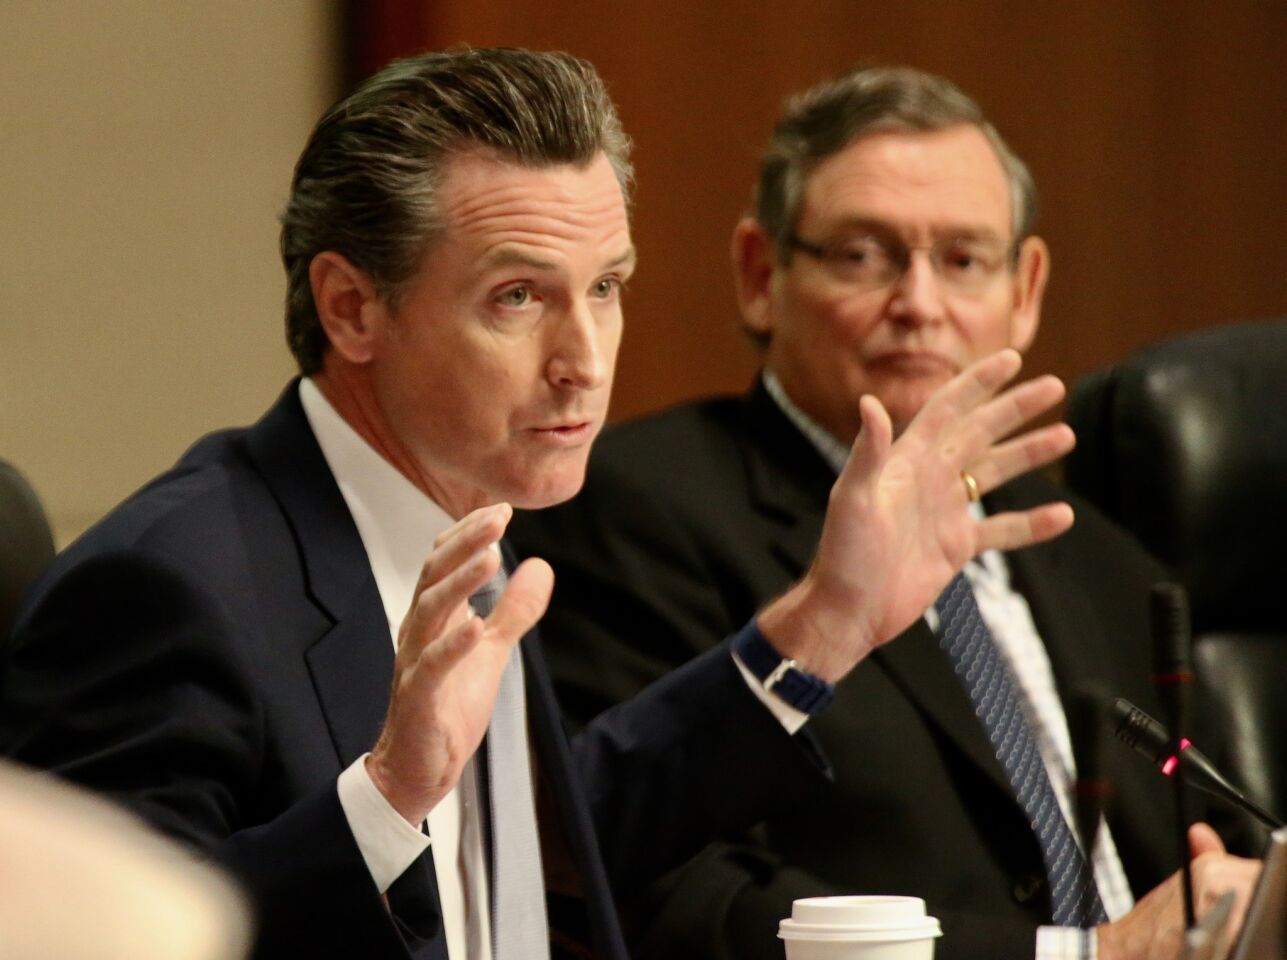 Lt. Gov. Newsom, left, asks the CSU Board of Trustees to reject the proposed tuition hike Wednesday morning in Long Beach.